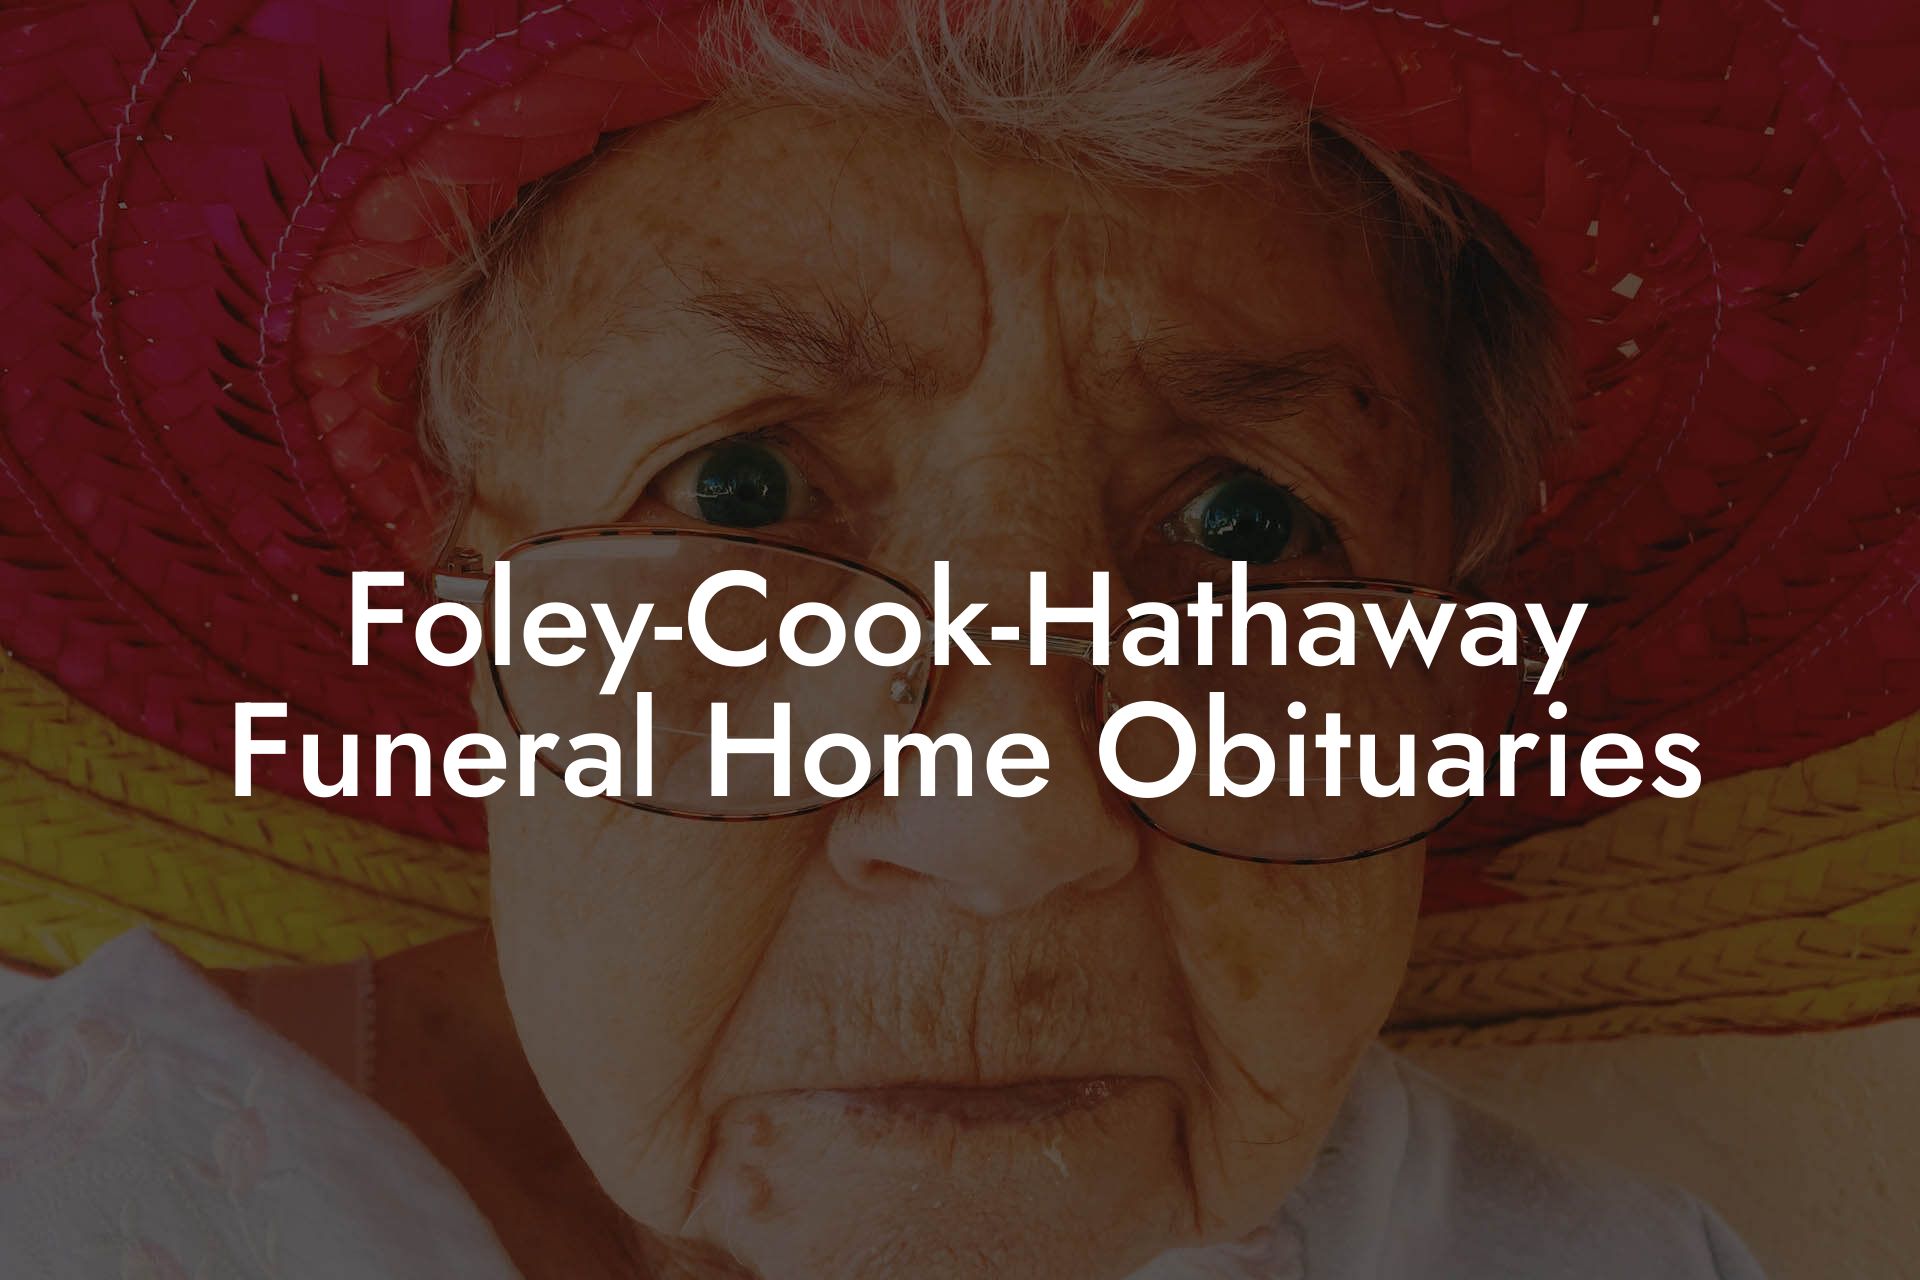 Foley-Cook-Hathaway Funeral Home Obituaries